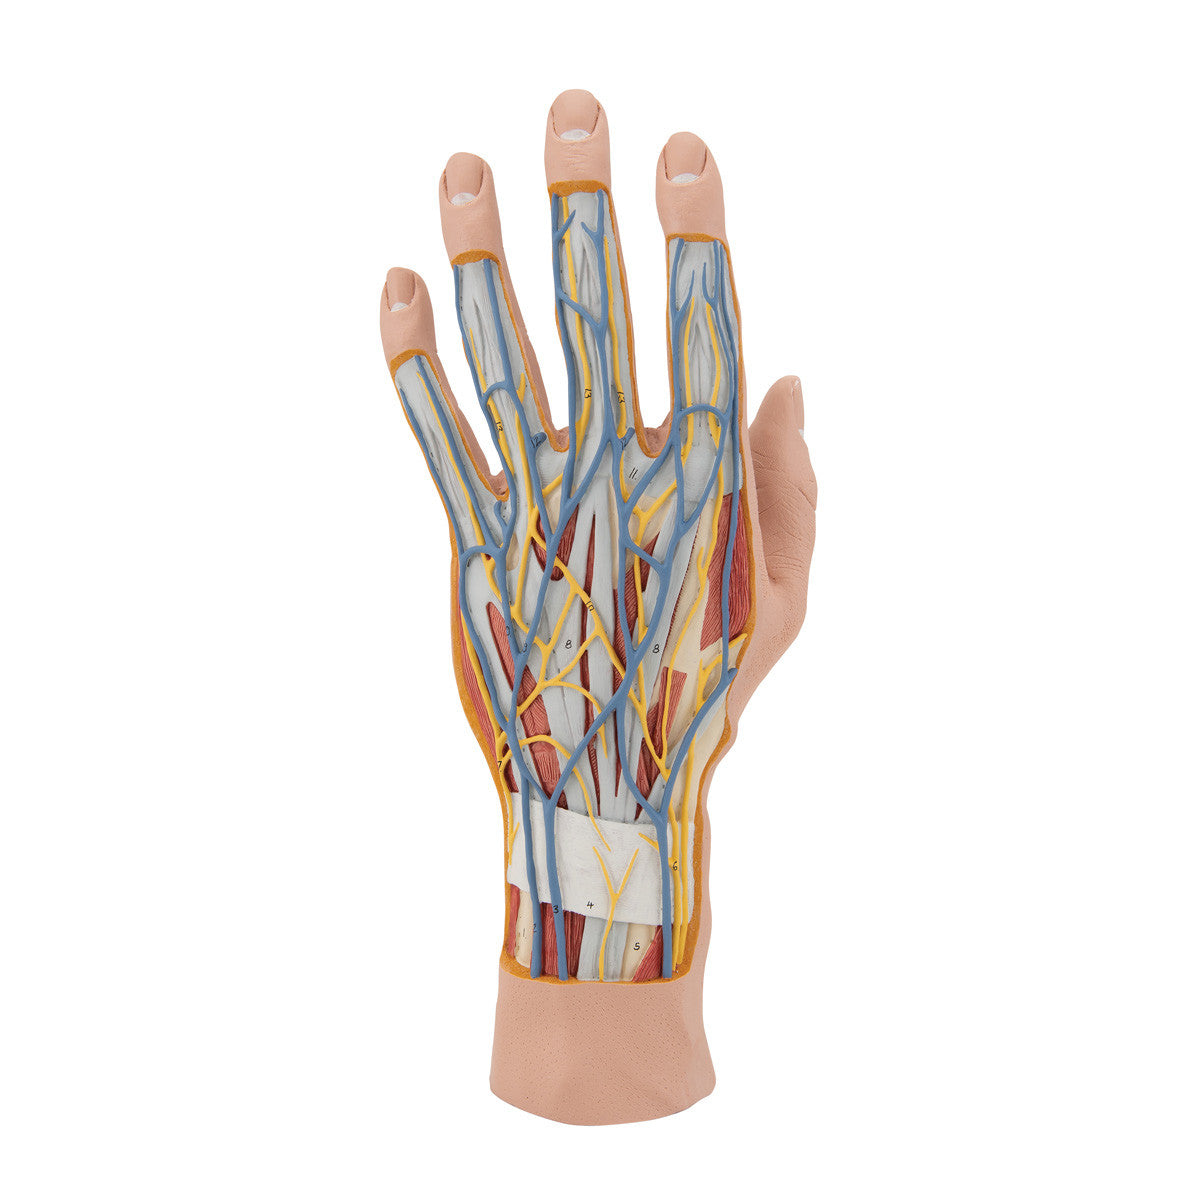 m18_04_1200_1200_life-size-hand-model-with-muscles-tendons-ligaments-nerves-arteries-3-part-3b-smart-anatomy__82985.1589752890.1280.1280.jpg